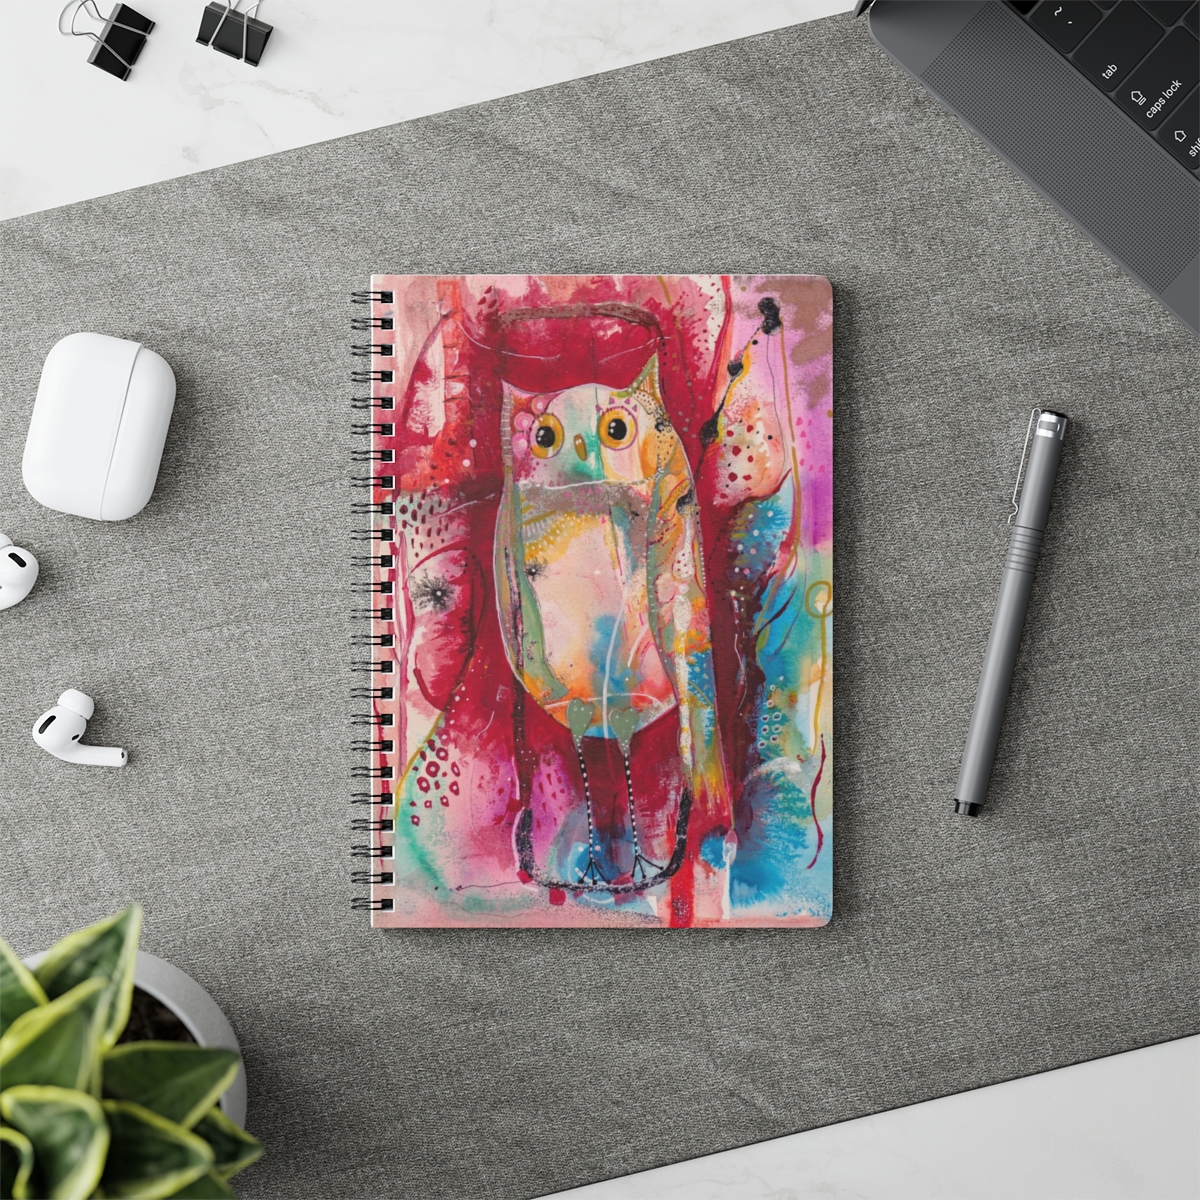 Whimsical owl notebook in context- Owl is multi-coloured on an abstract background.